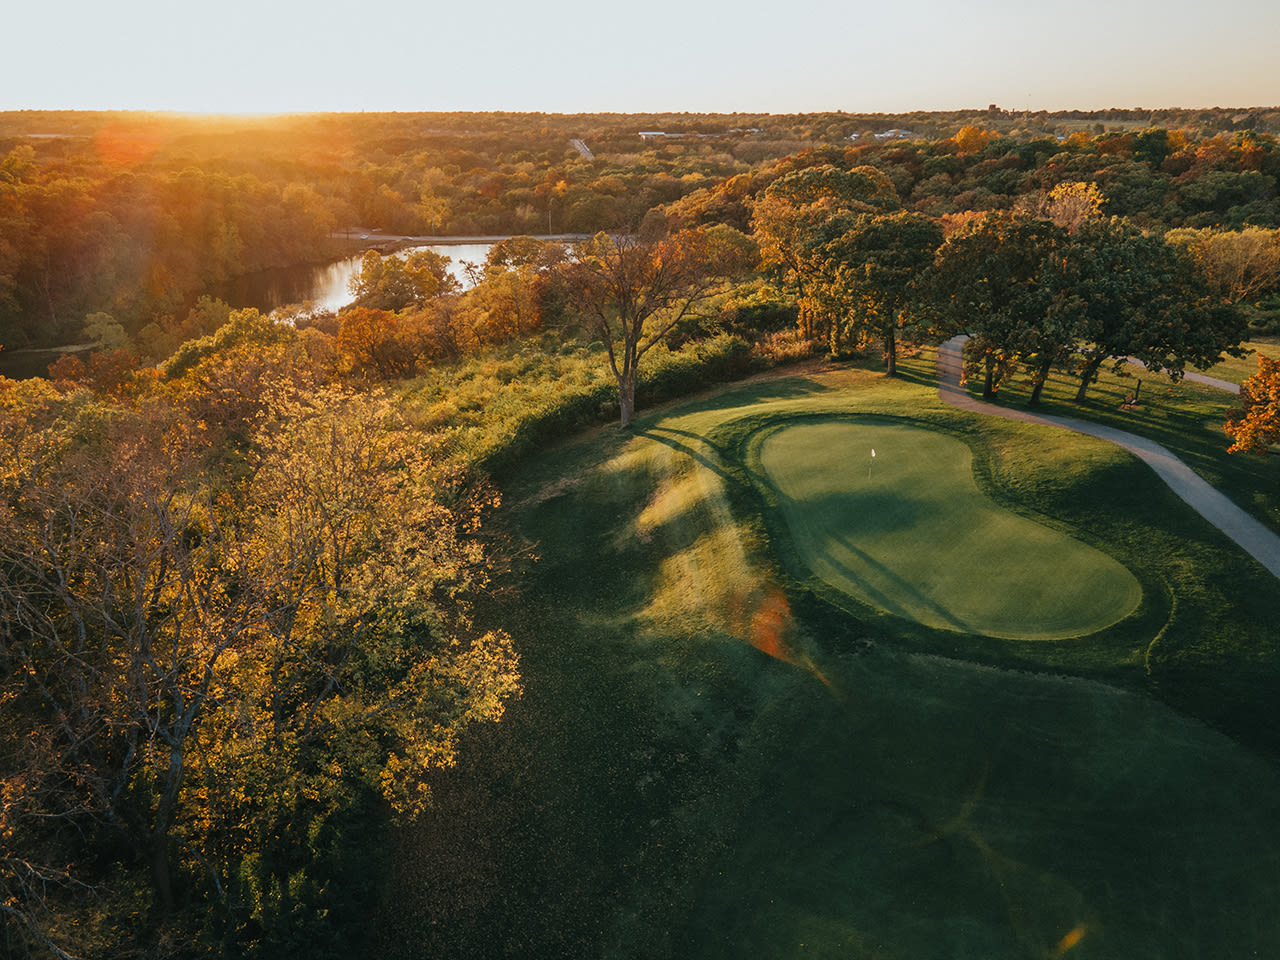 This Midwestern city is looking for $7 million to renovate a Tillinghast classic that once hosted a PGA Tour event